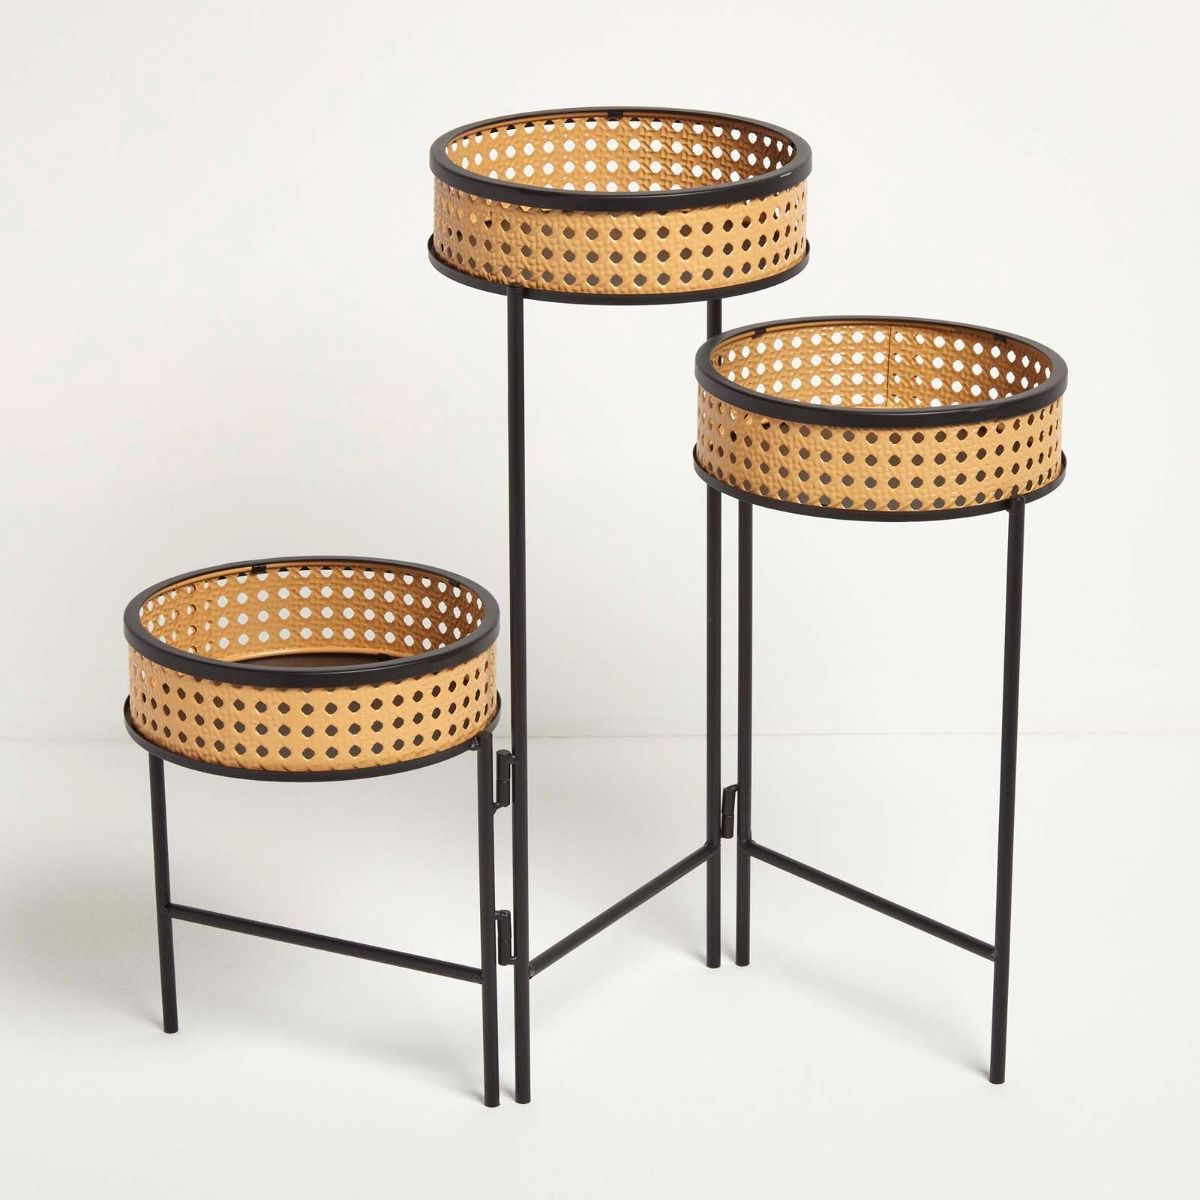 Black Metal 3 Tier Plant Stand Pertaining To Fashionable Three Tier Plant Stands (View 15 of 15)